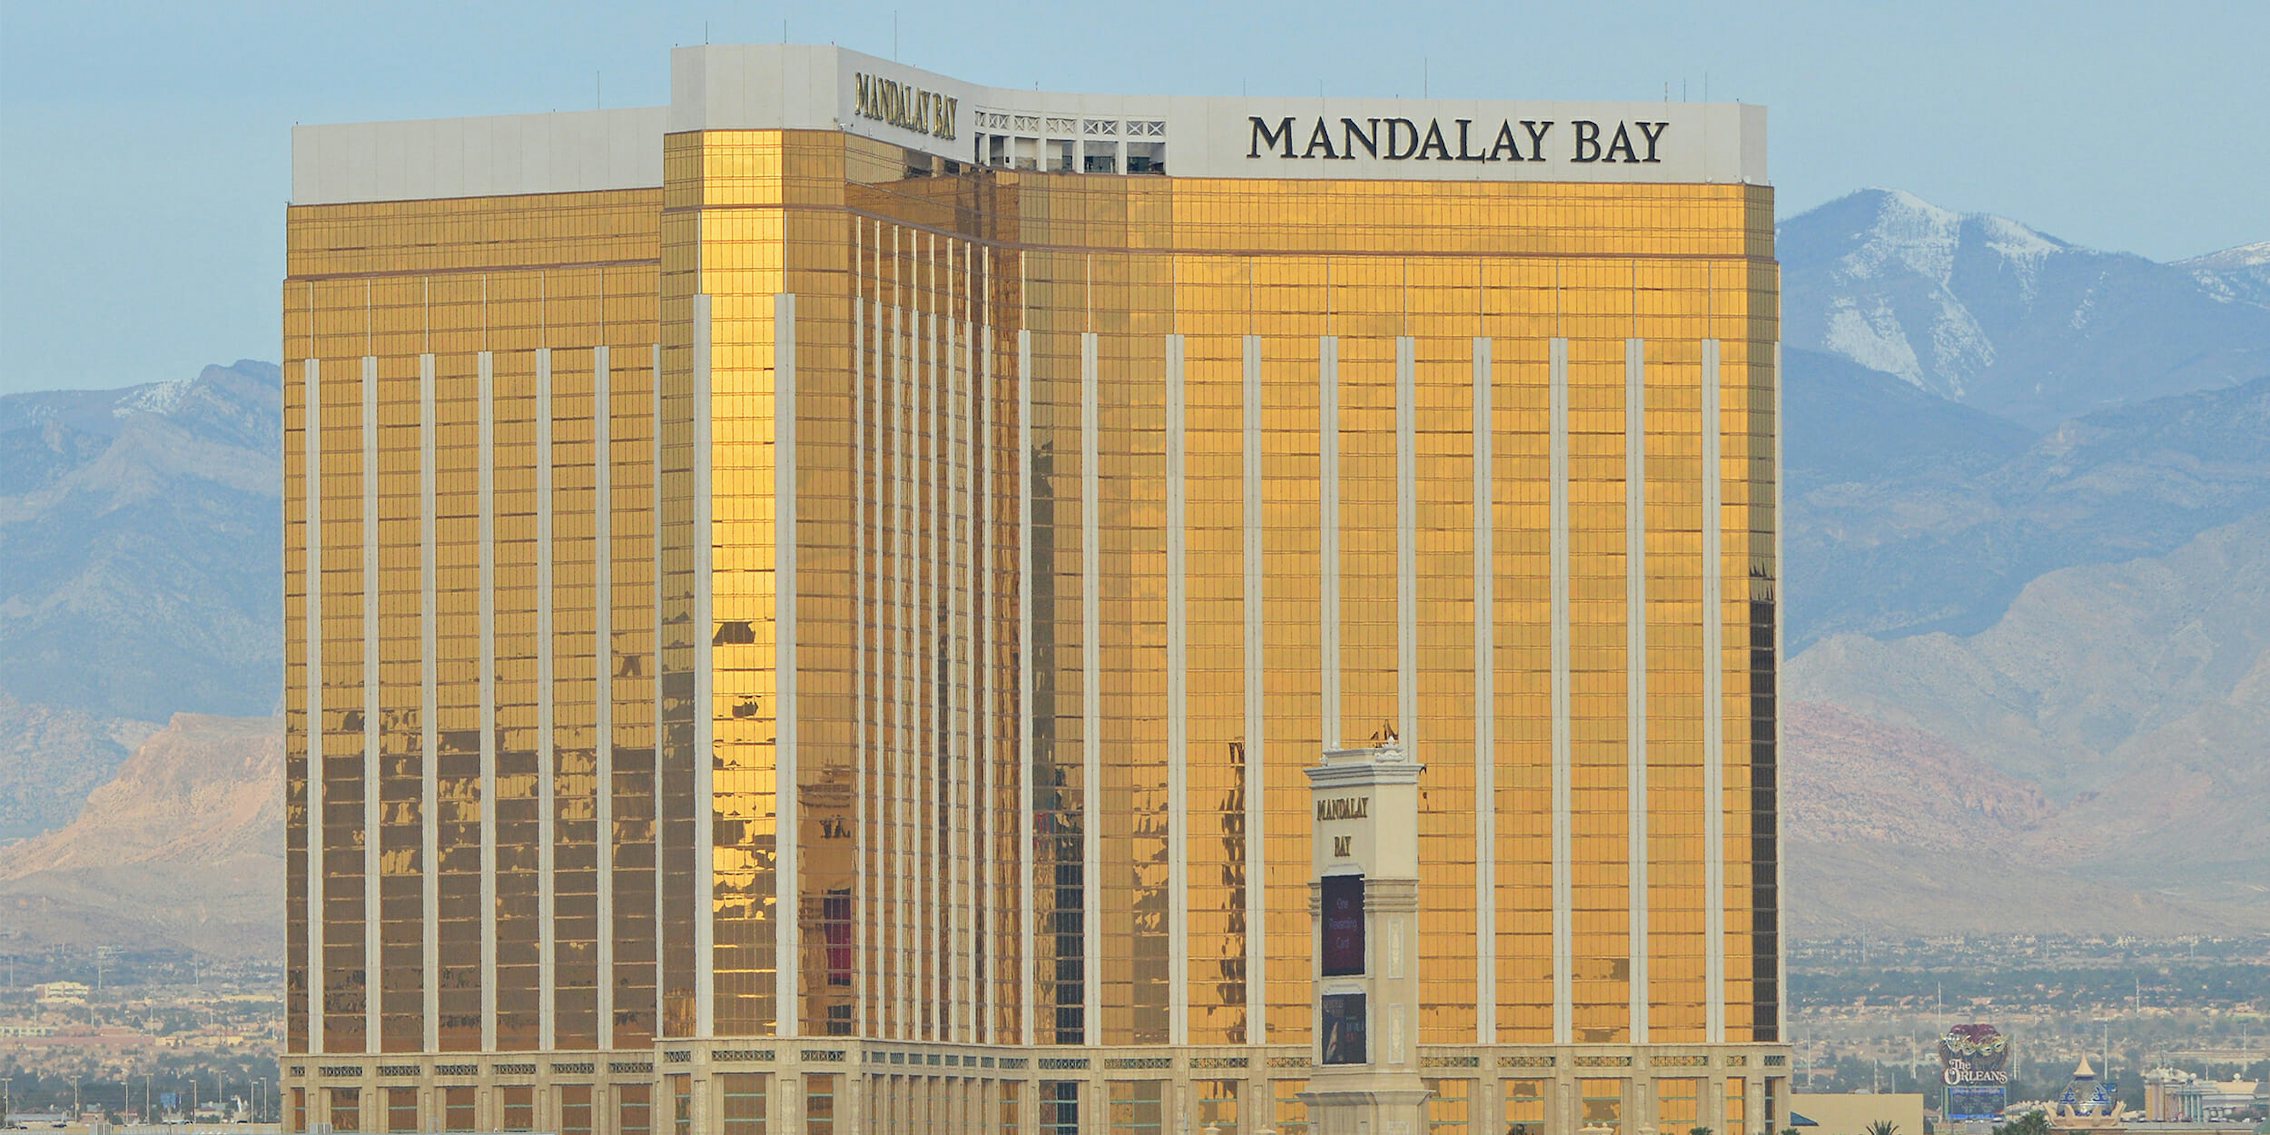 Mandalay Bay hotel and casino, Las Vegas, as seen from nearby runway